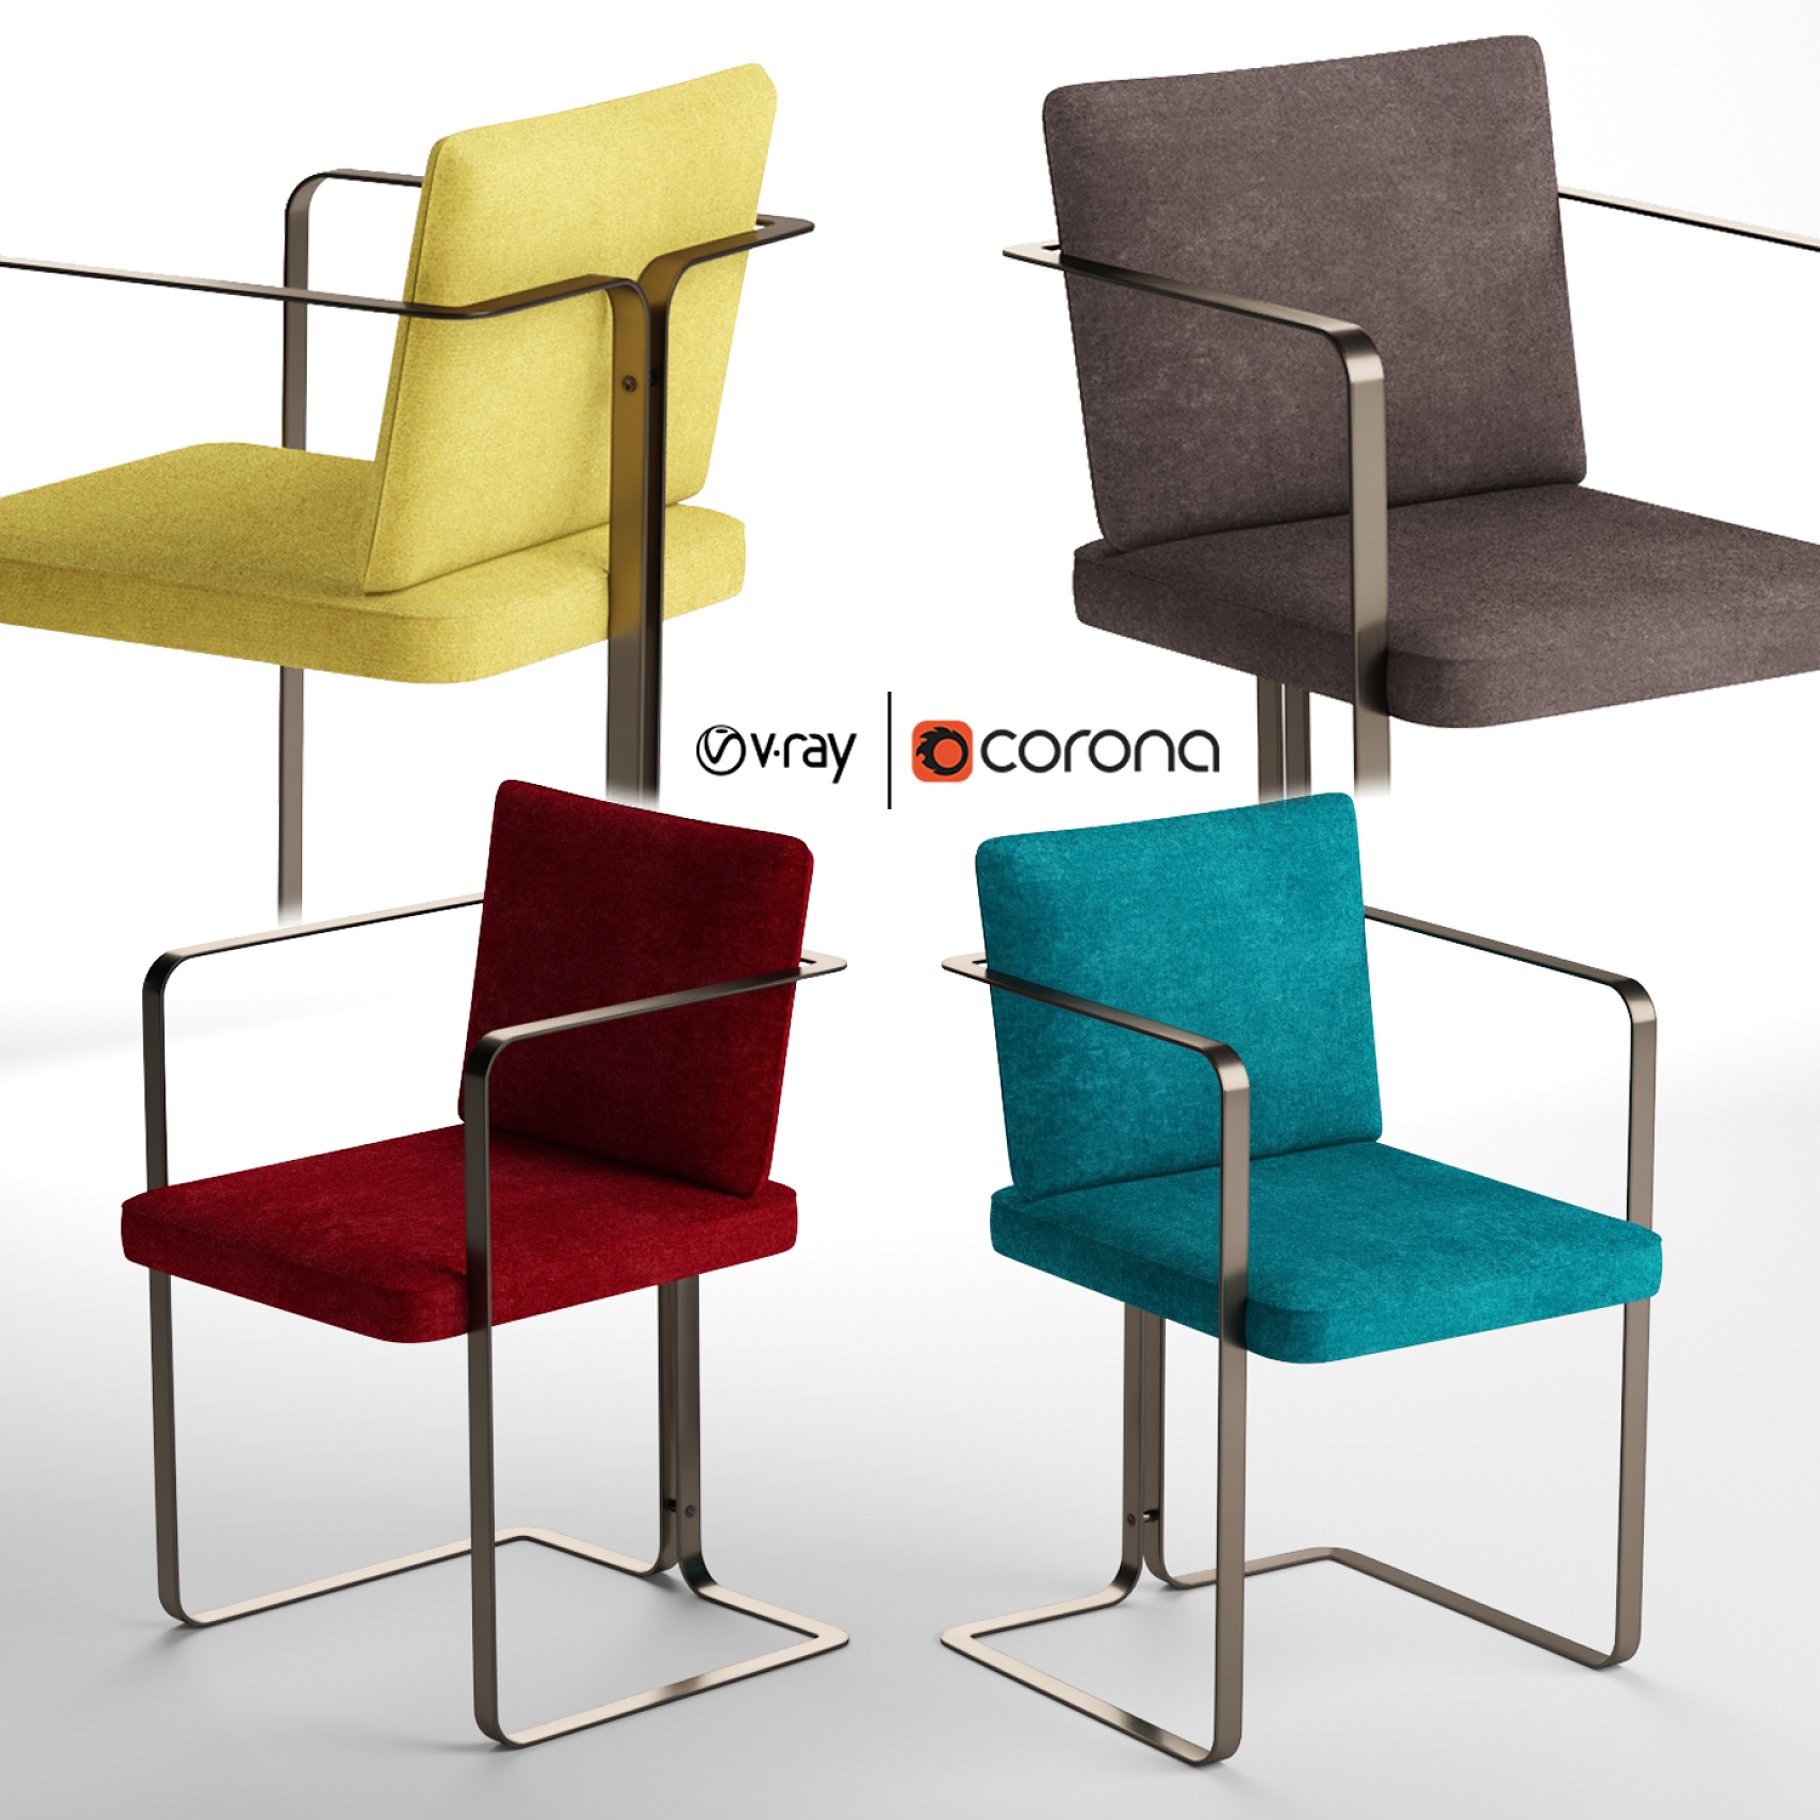 Rendering of an irresistible 3d model of an armchair with in various colors